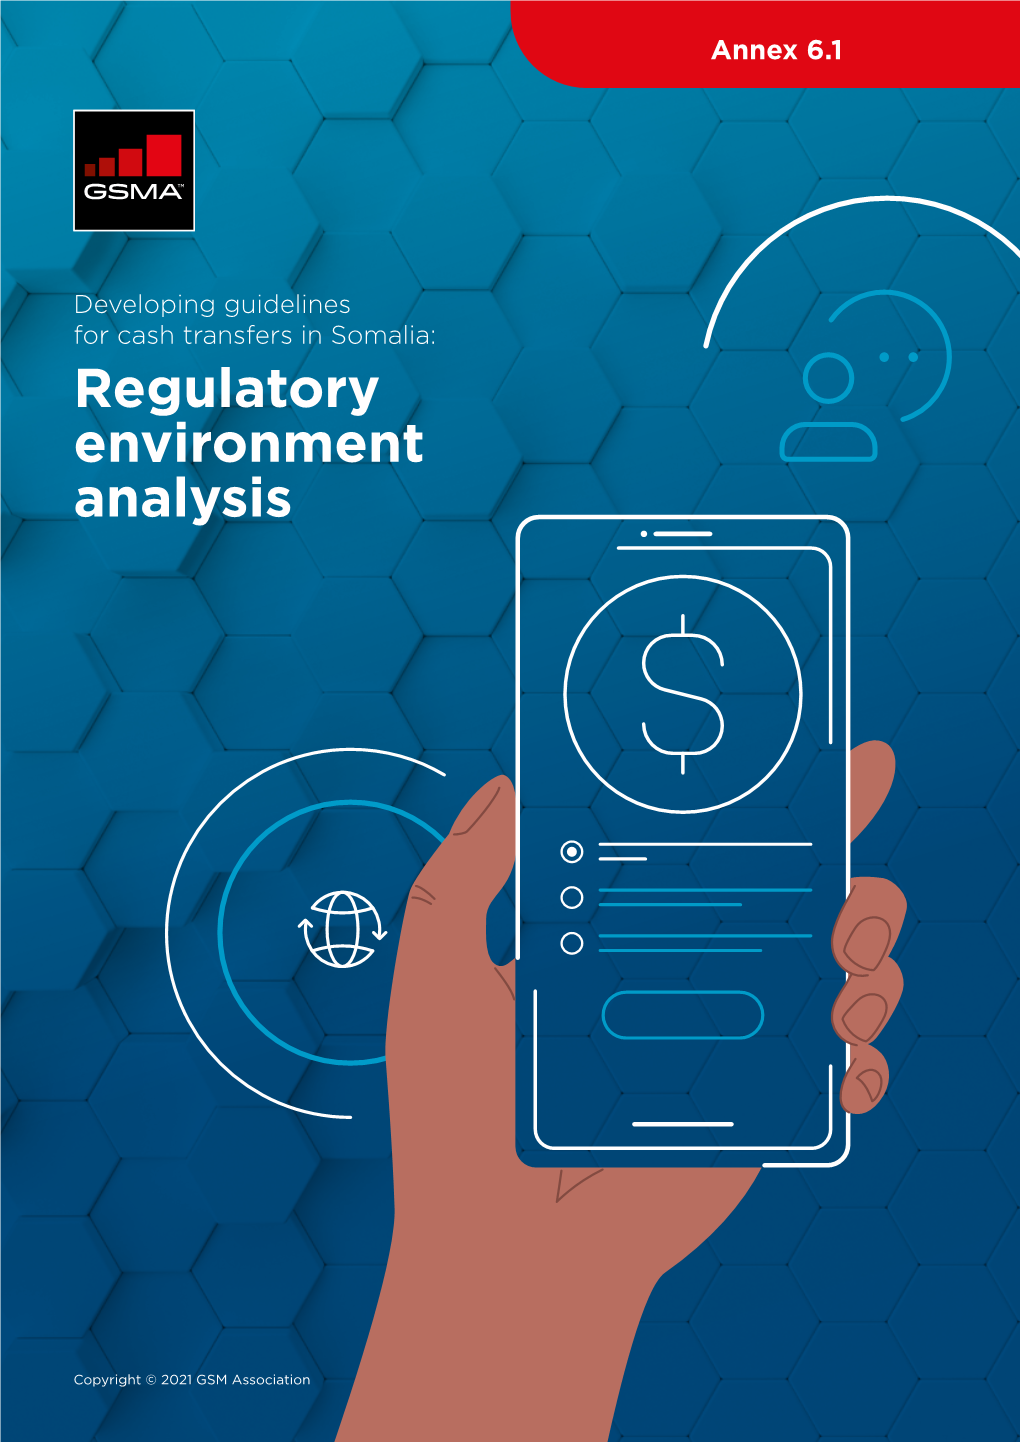 Context Analysis and Capability Assessment of the Mobile Money